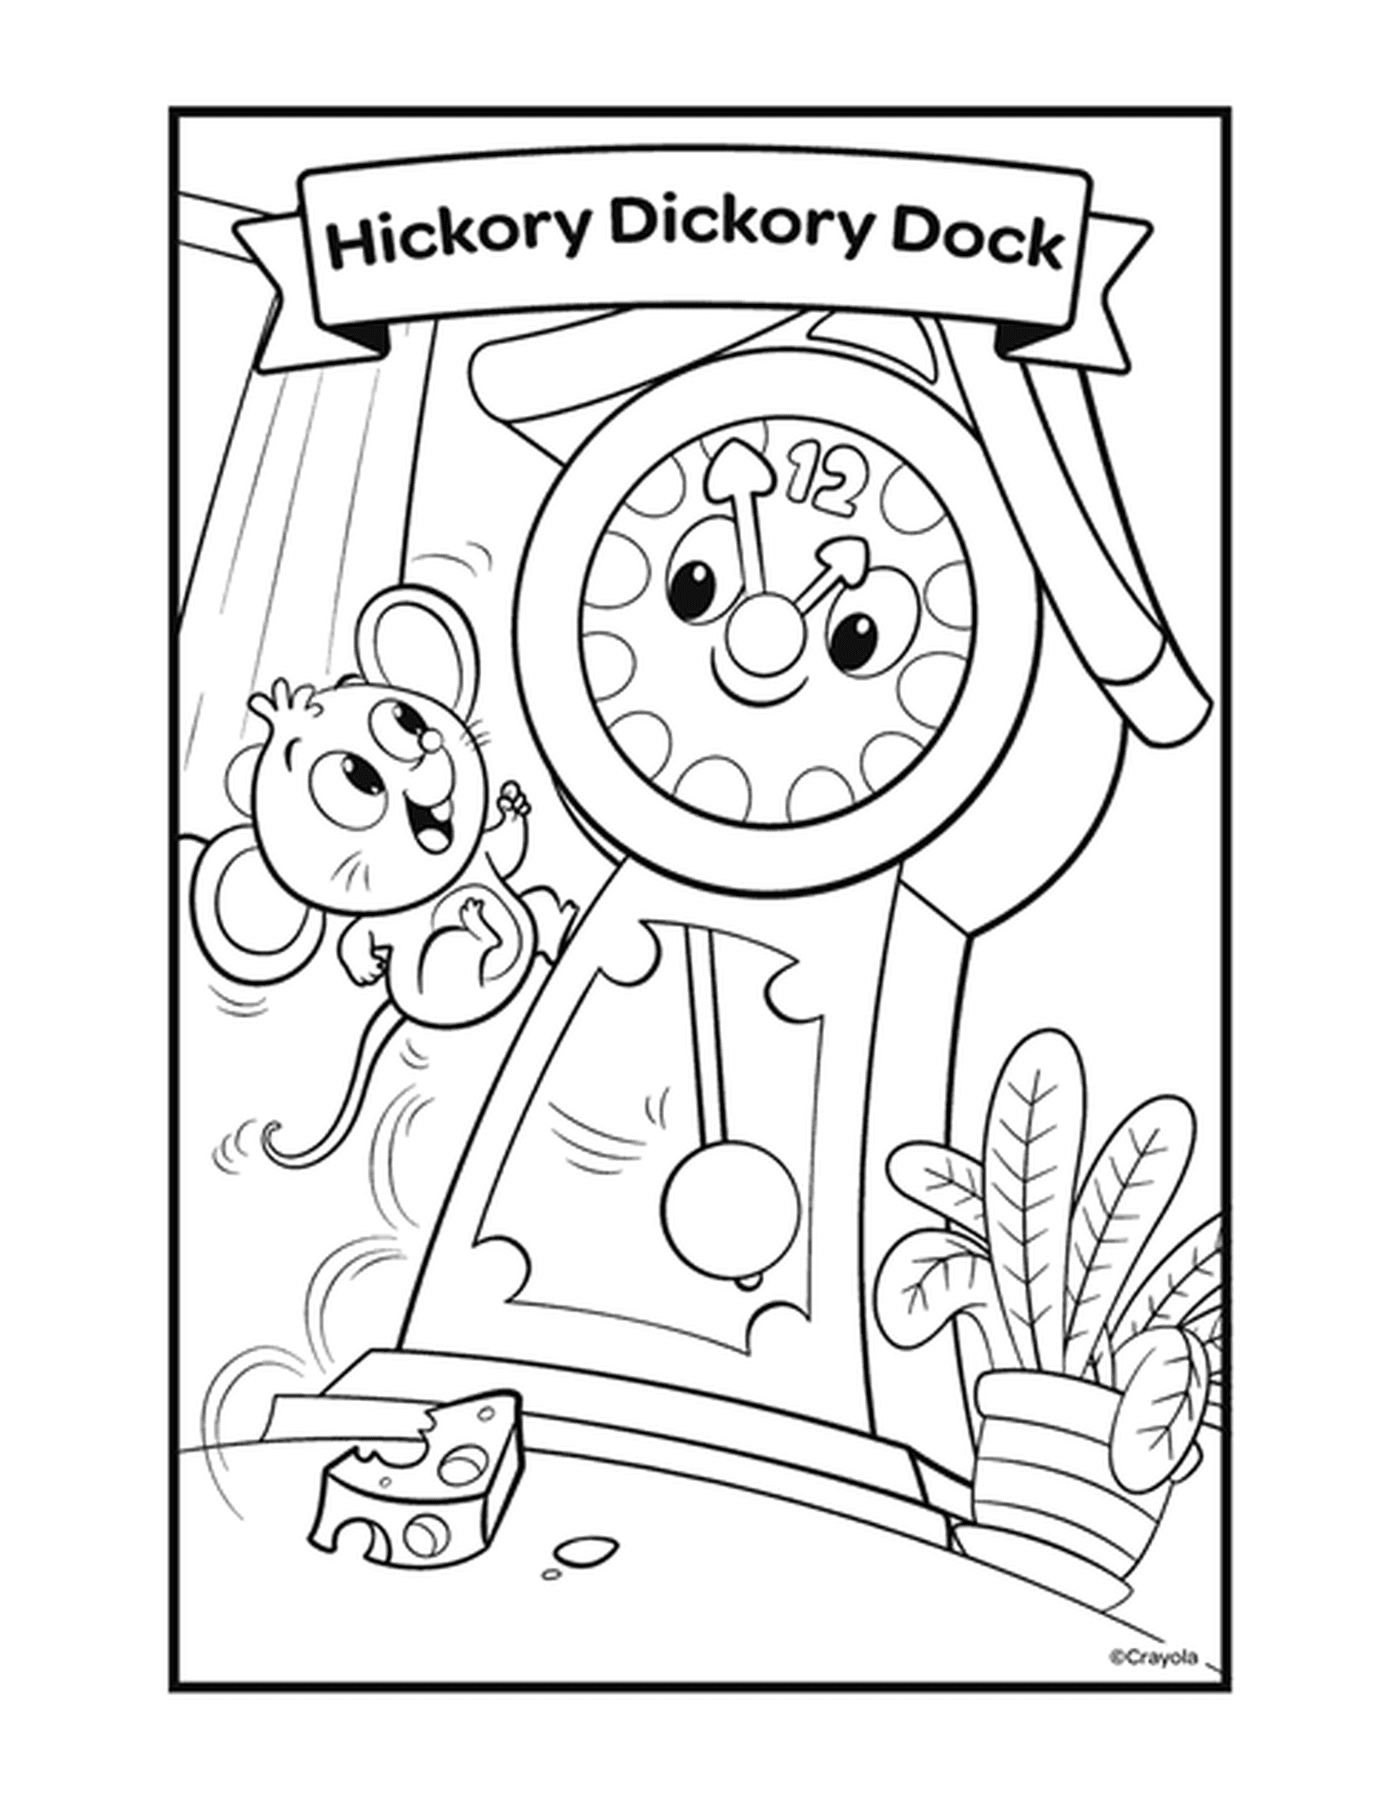 coloriage nursery rhymes hickory dickory dock